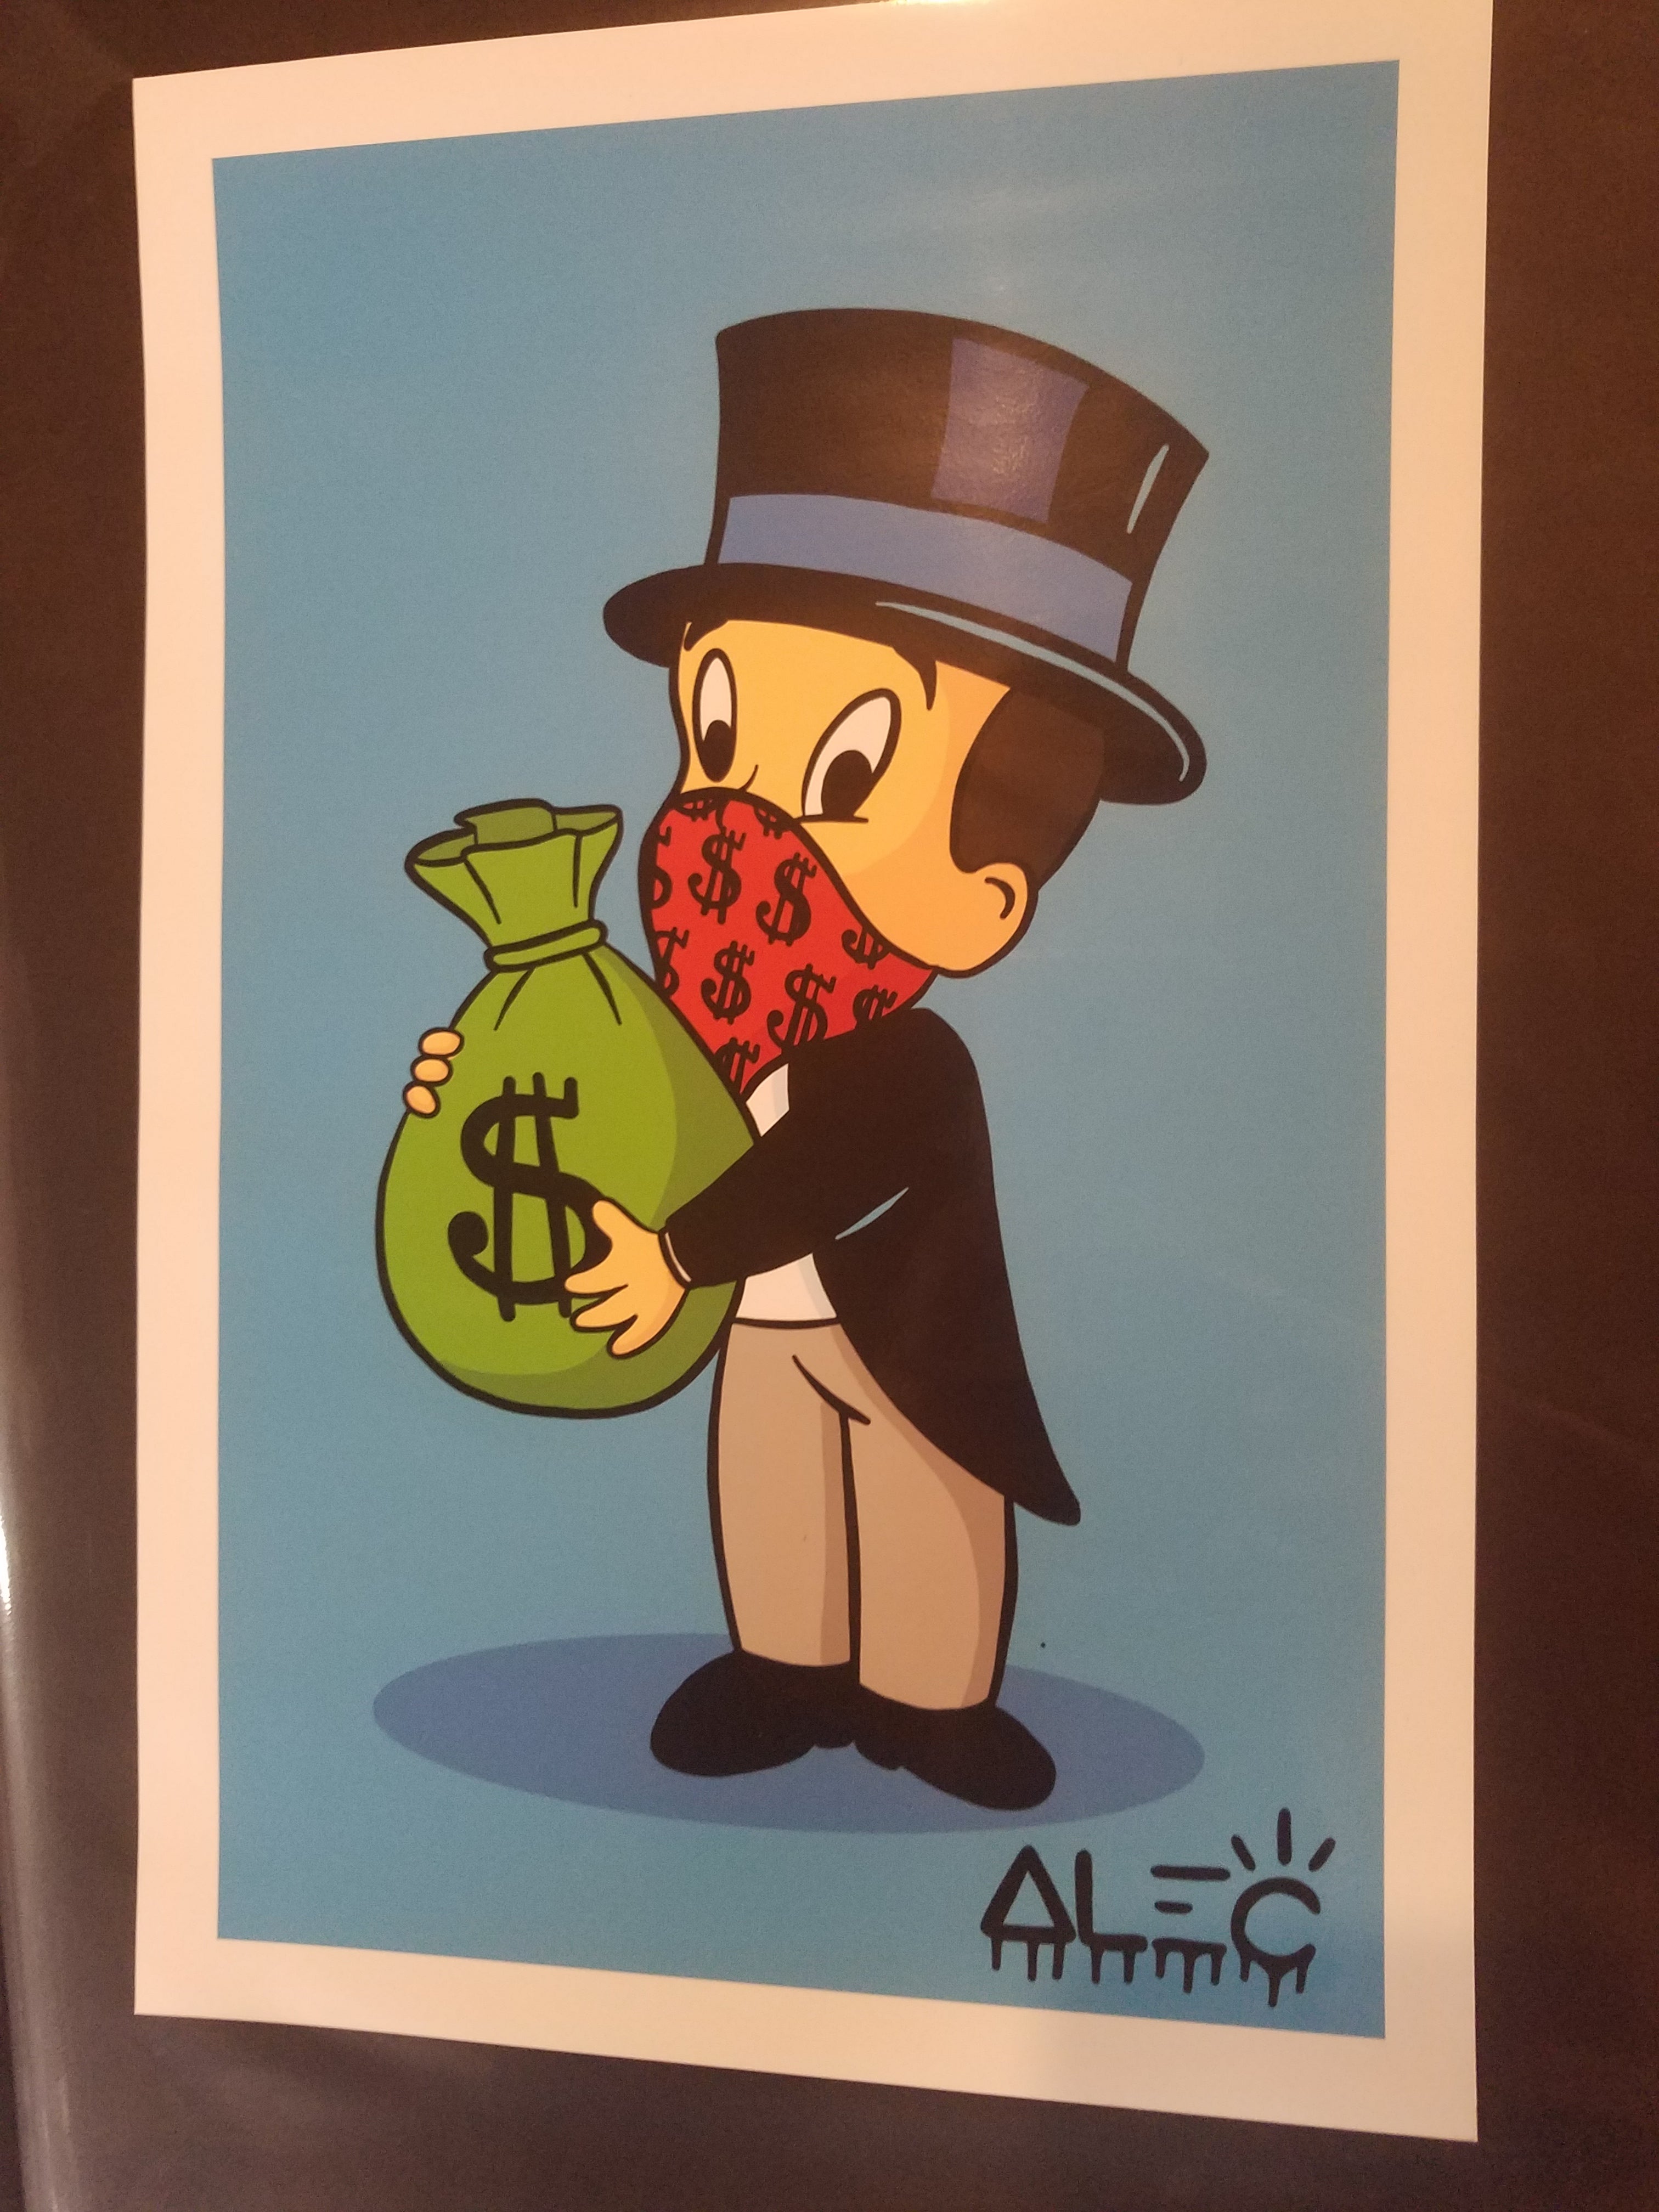 Title: Alec Monopoly Print  Poster artist: Alec Monopoly  Size: 8"x12"  Location: USA  Notes:  Check out our other listings for more hard-to-find and out-of-print posters.